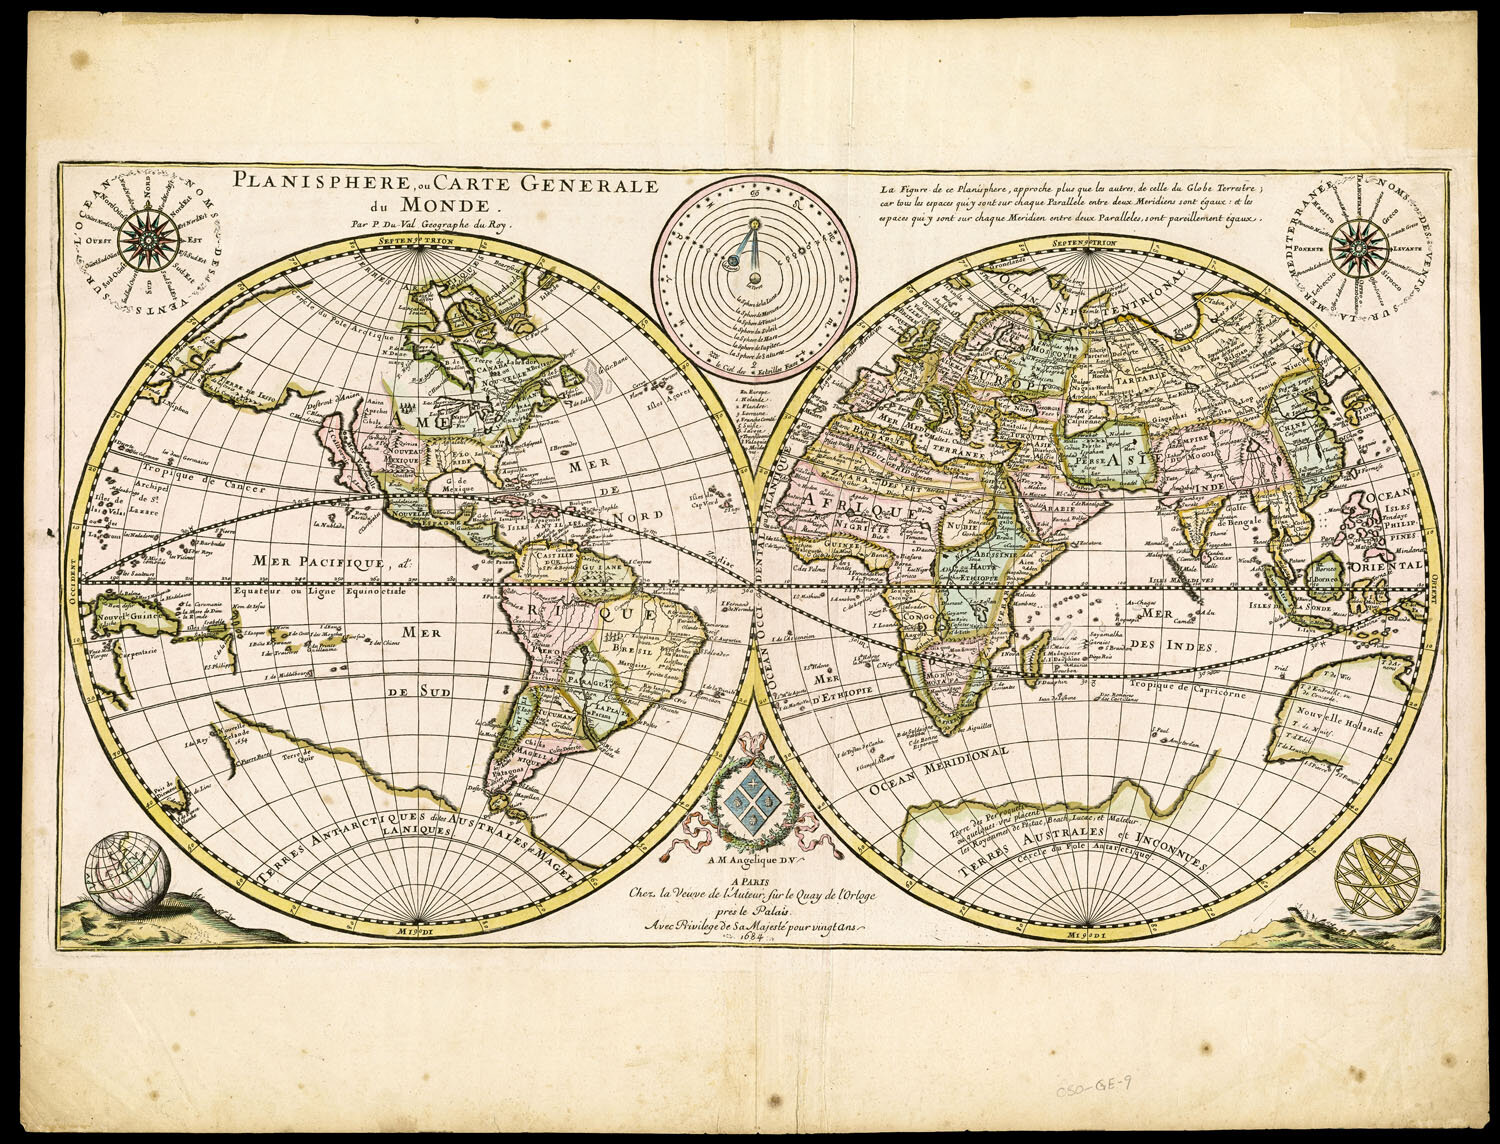 What Is a “Planisphere”? — Mapping as Process